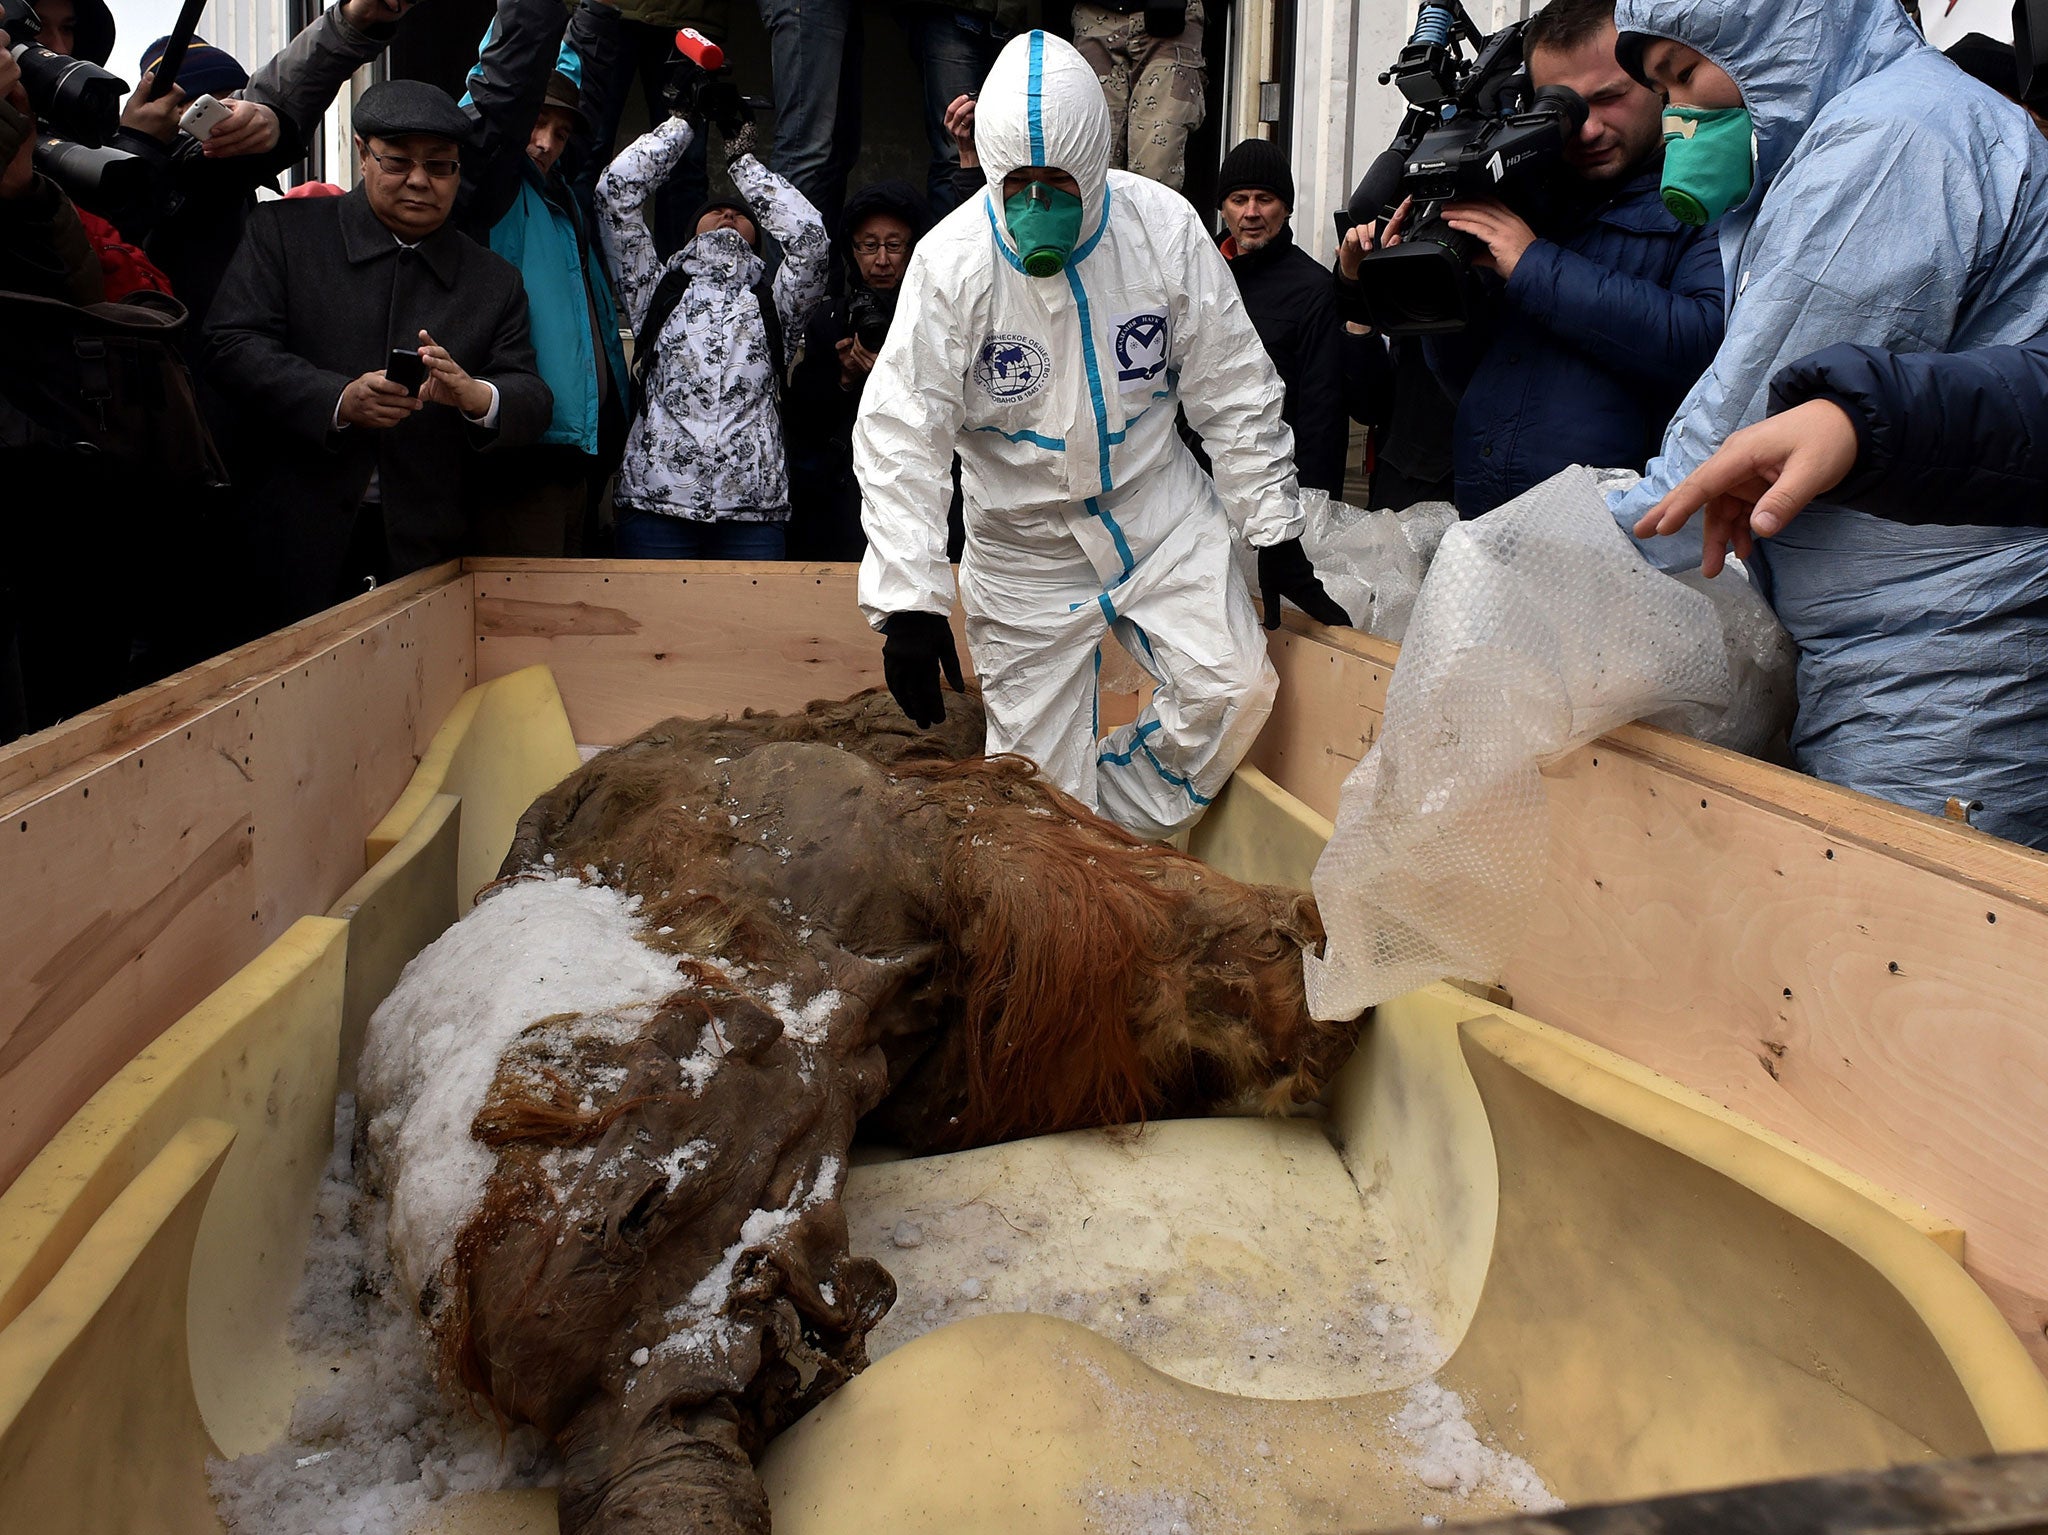 Workers inspect the body of a mammoth prior the start of an exhibition of the Russian Geographic Union in central Moscow on October 28, 2014.